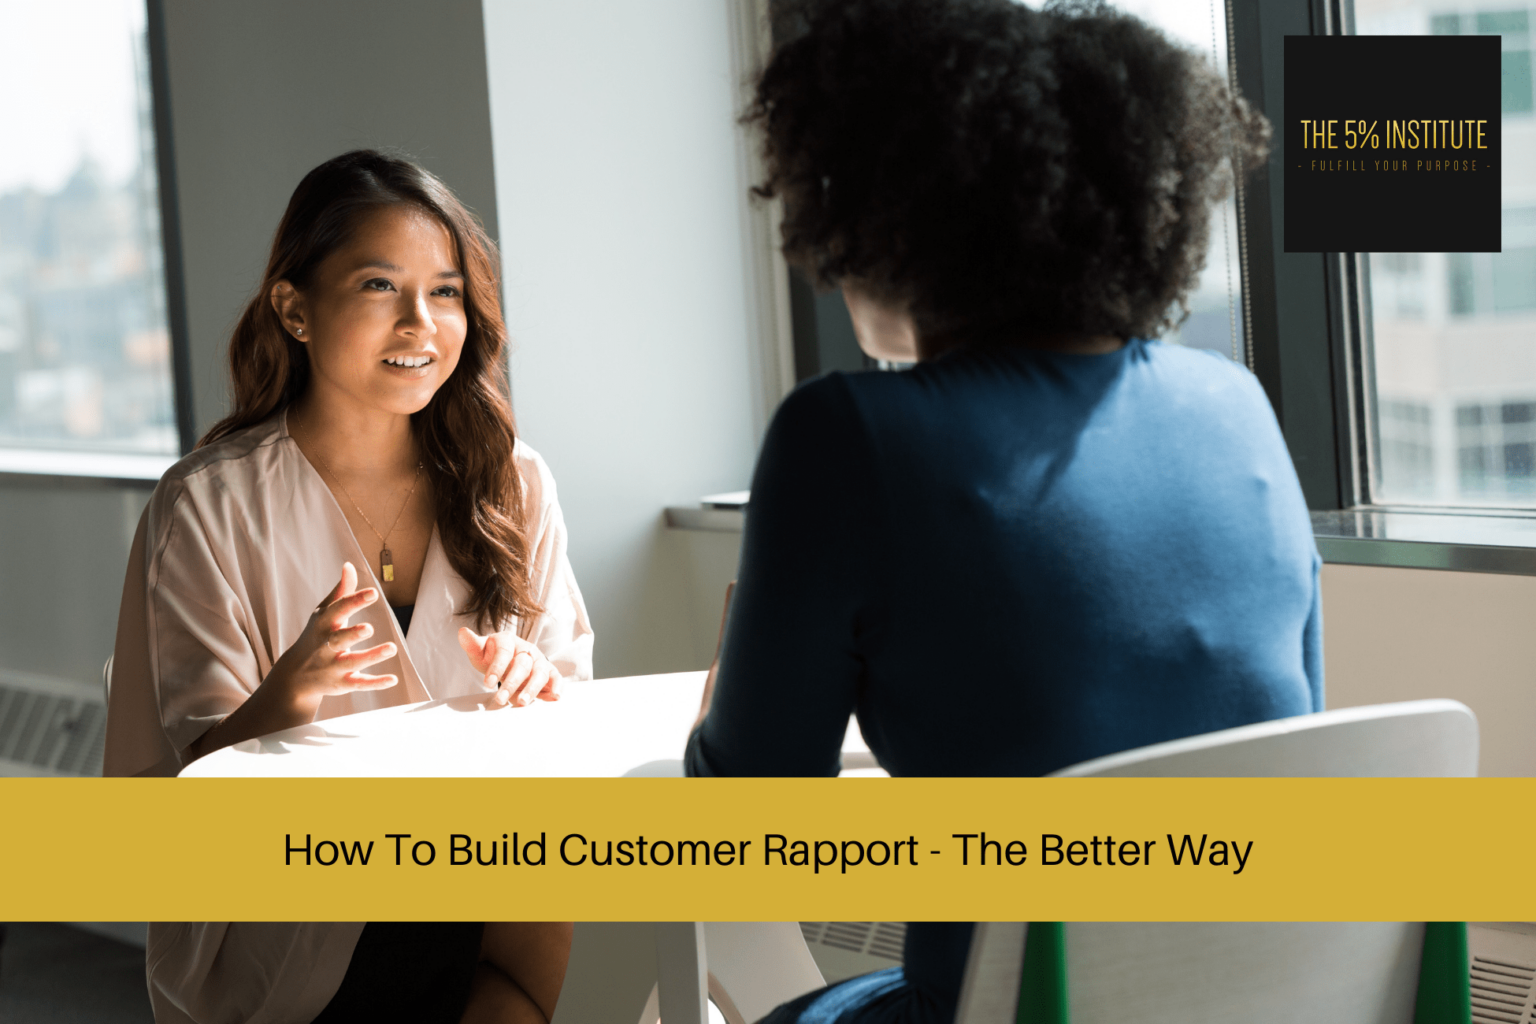 How To Build Customer Rapport - The Better Way - The 5% Institute